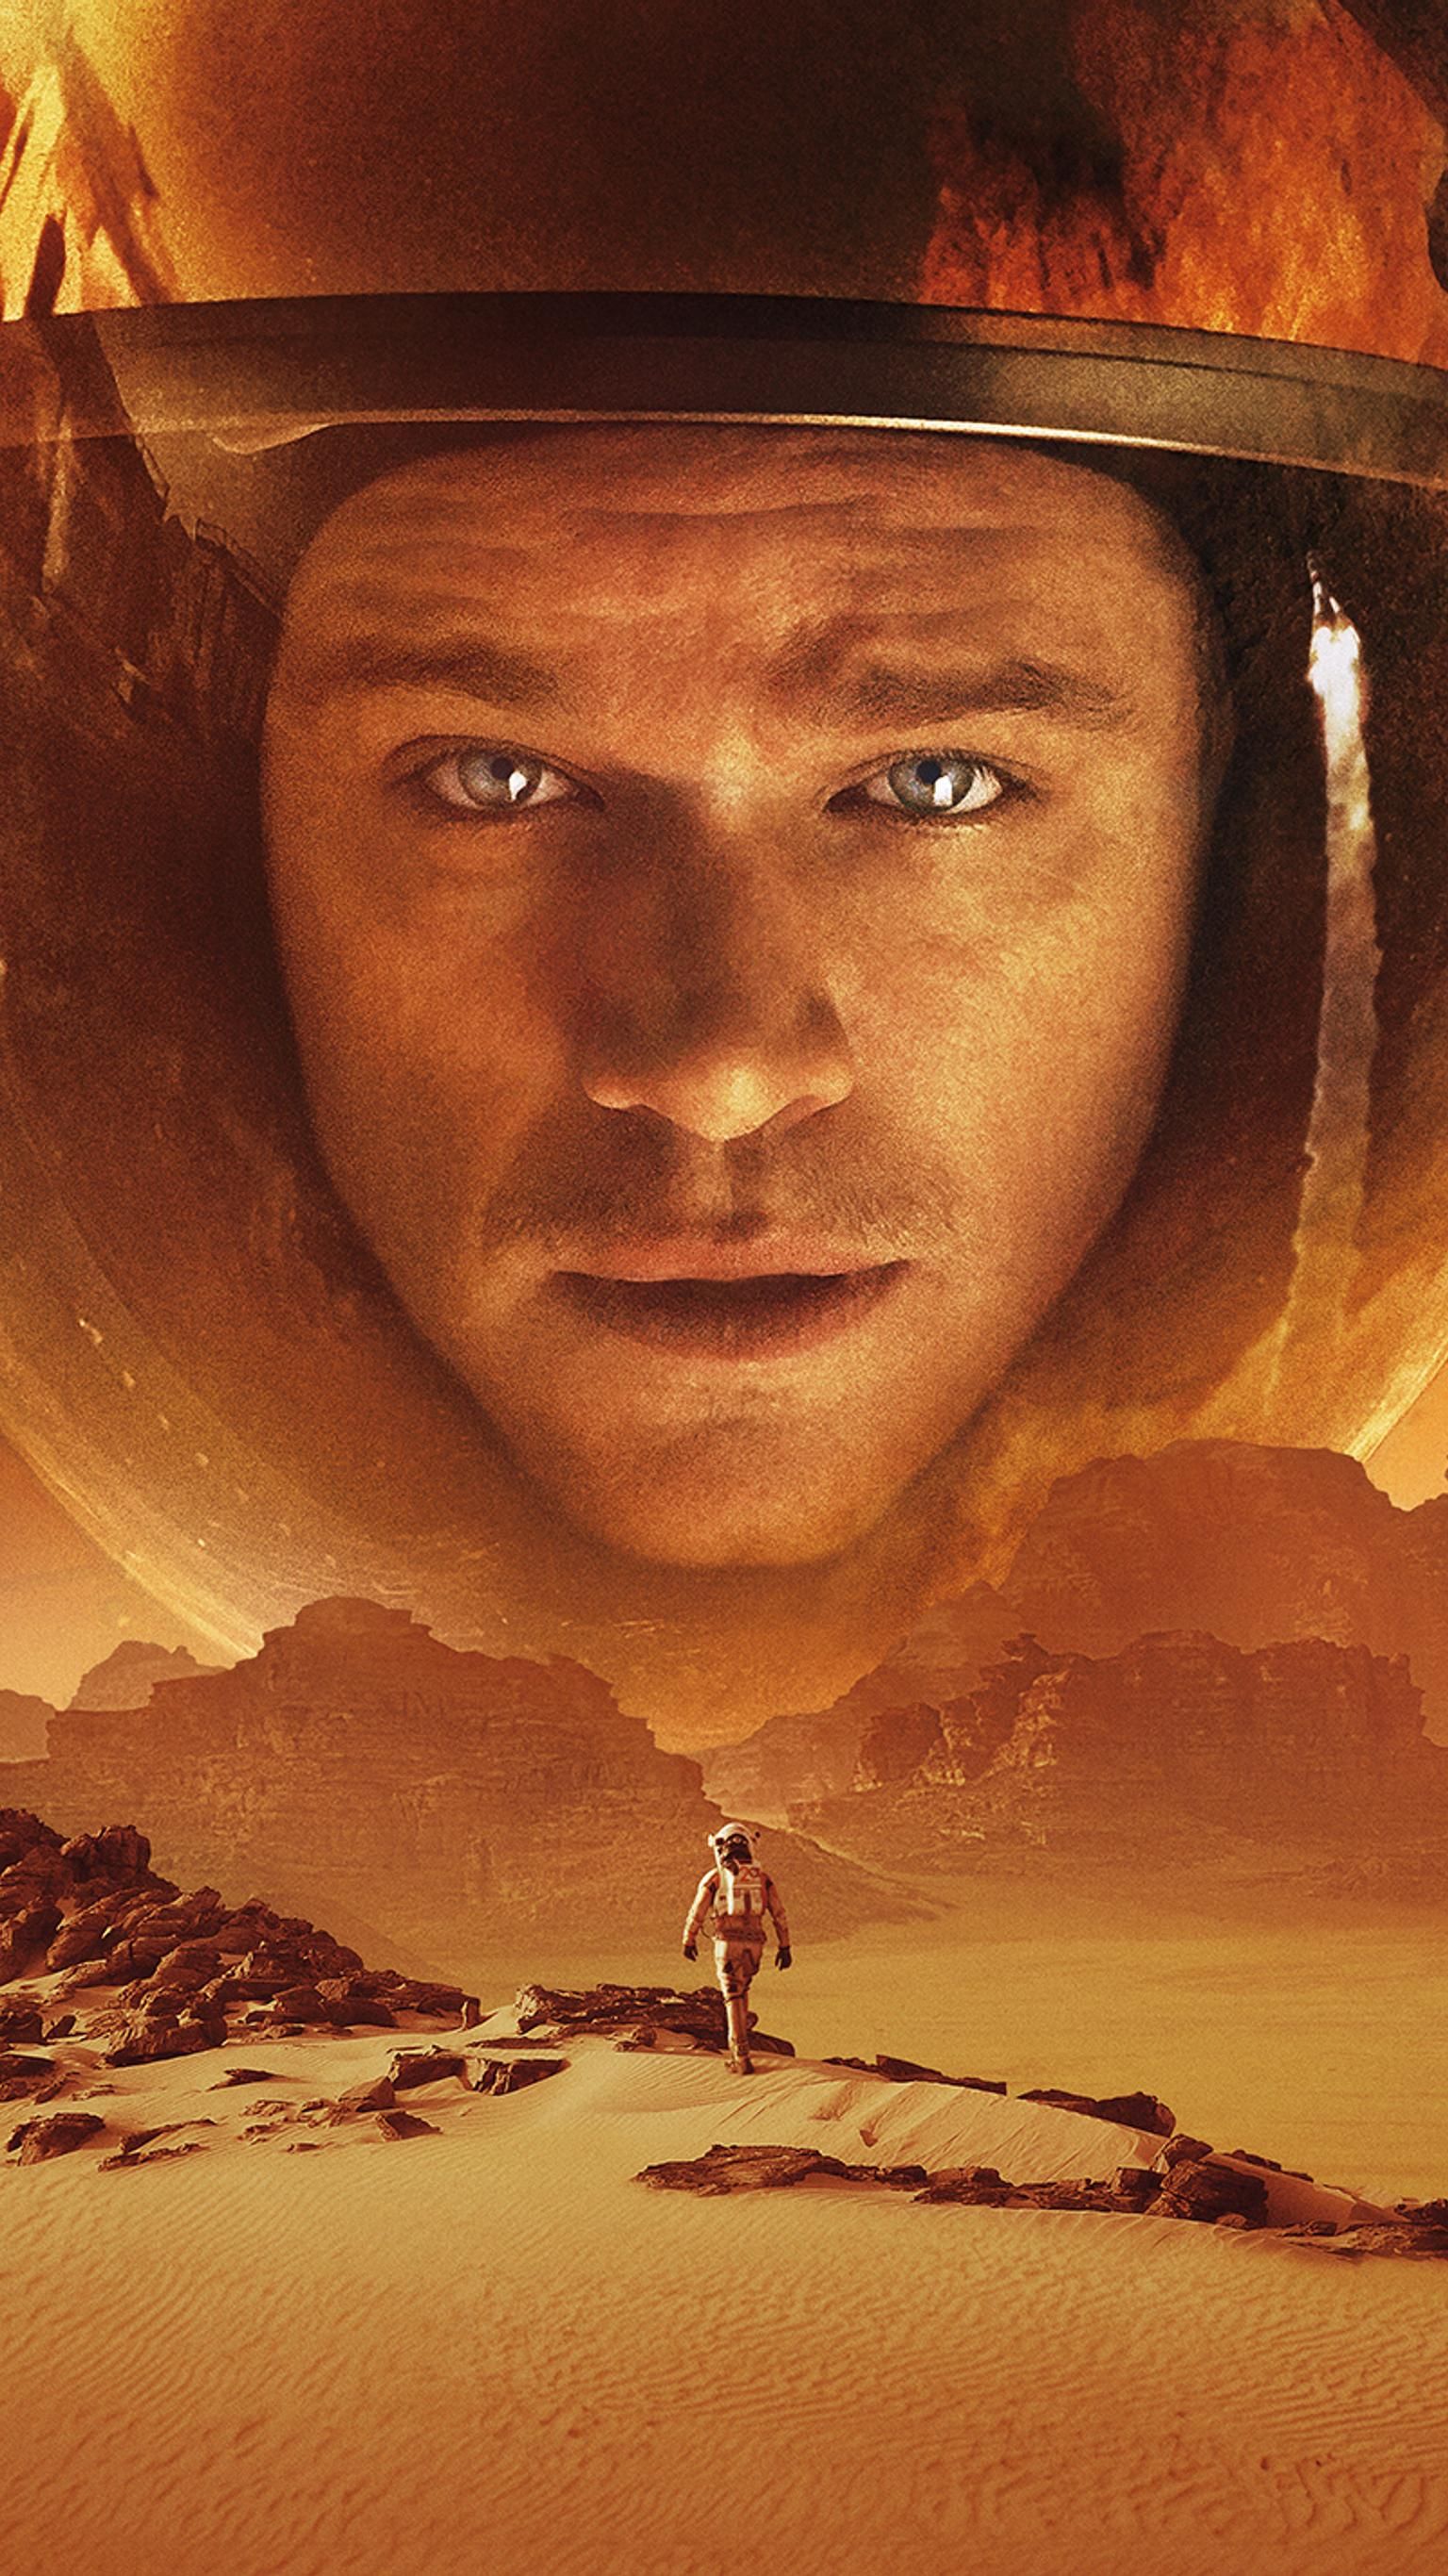 The Martian (2015) Phone Wallpaper. Moviemania. The martian, Space movie posters, The martian film